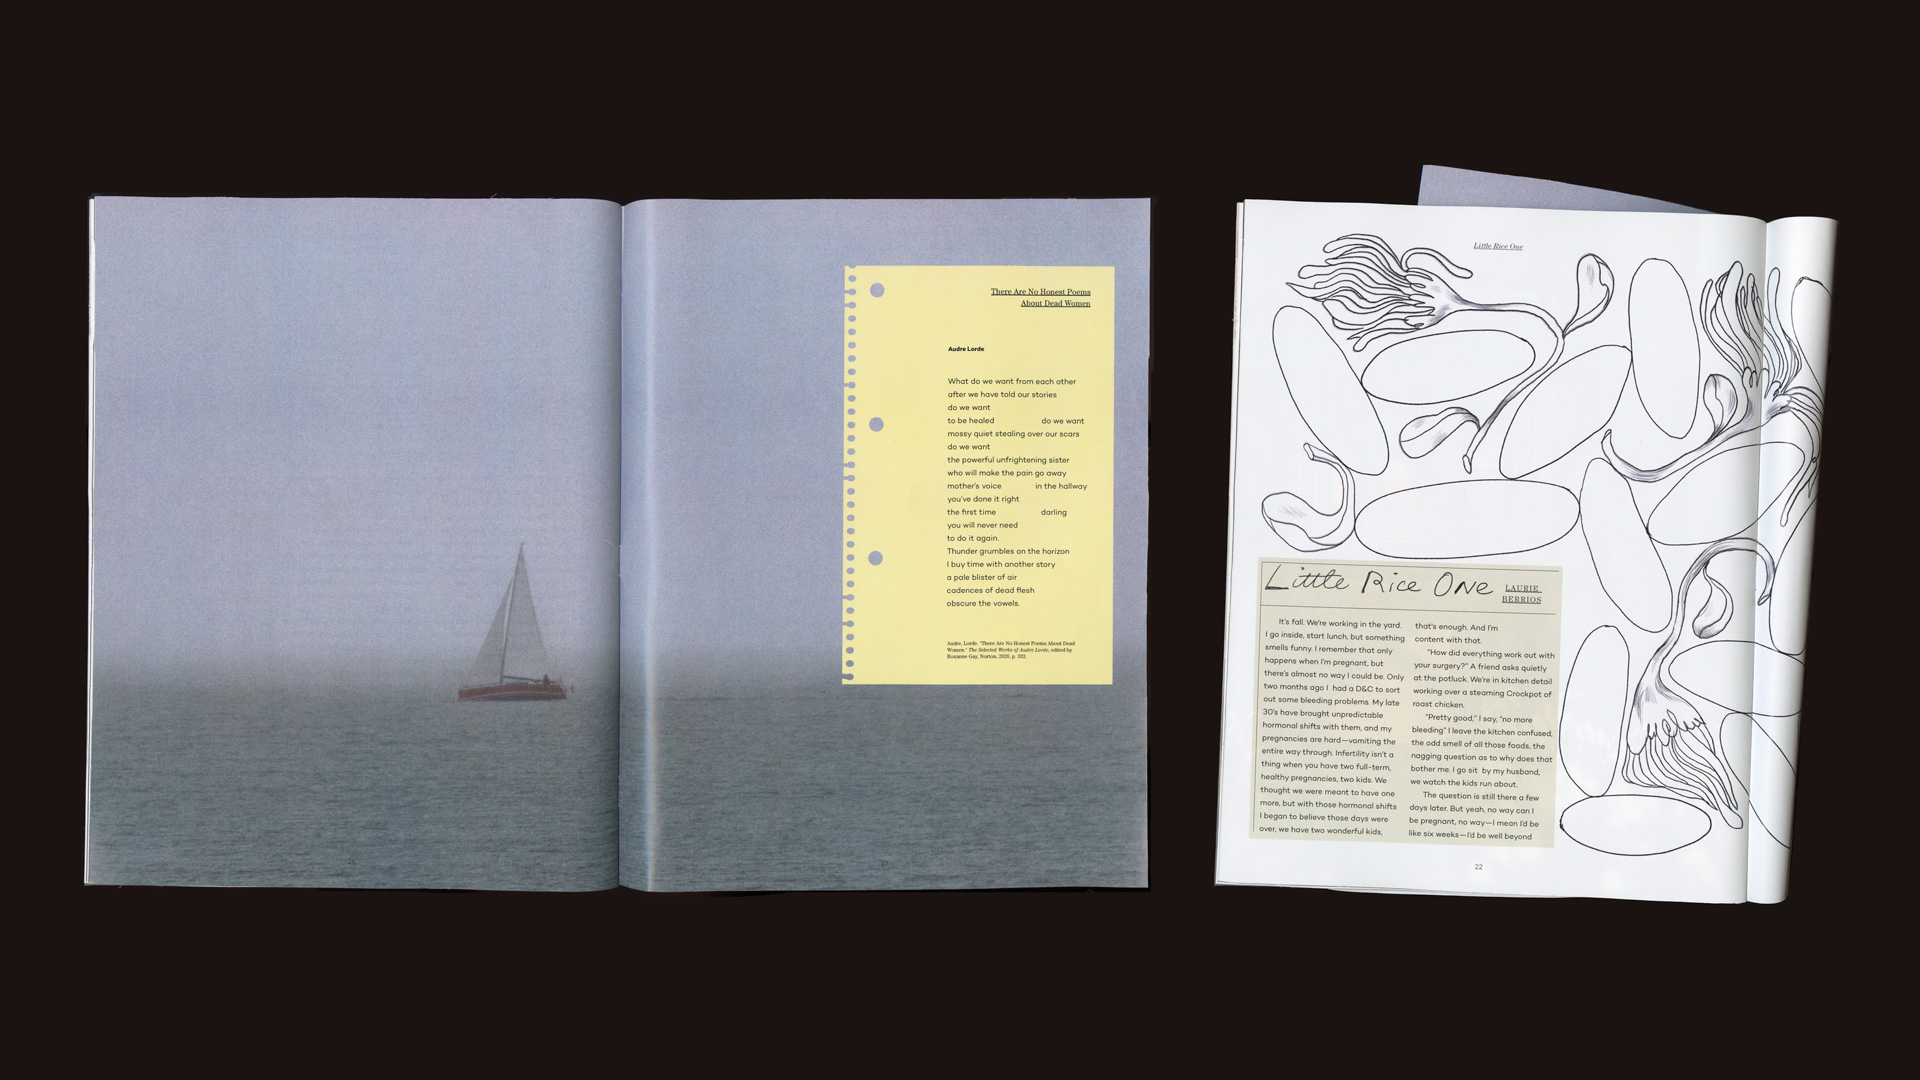 Scan of Harbour magazine spread and a folded spread from an illustrated article.